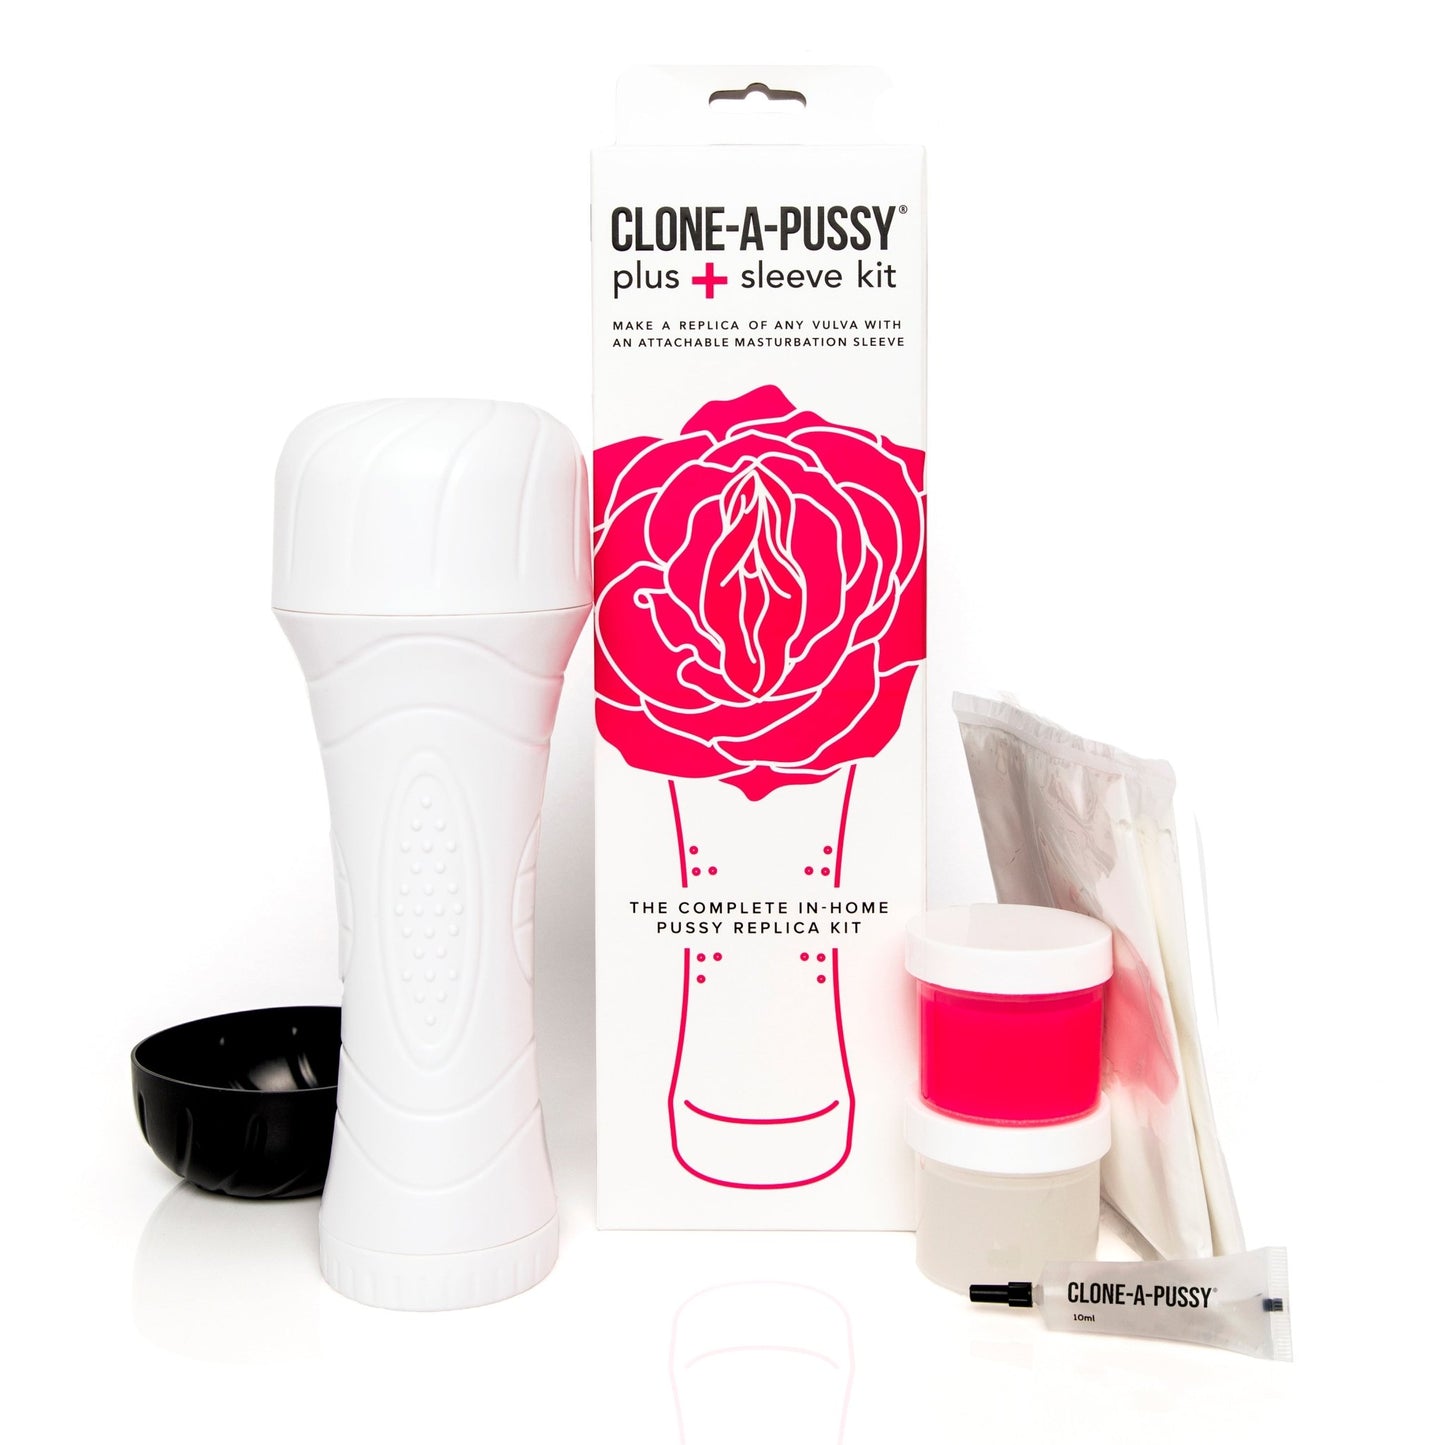 Clone-A-Willy - Clone-A-Pussy 'Kloon Je Vagina' - Plus Kit met Sleeve - Yonifyer